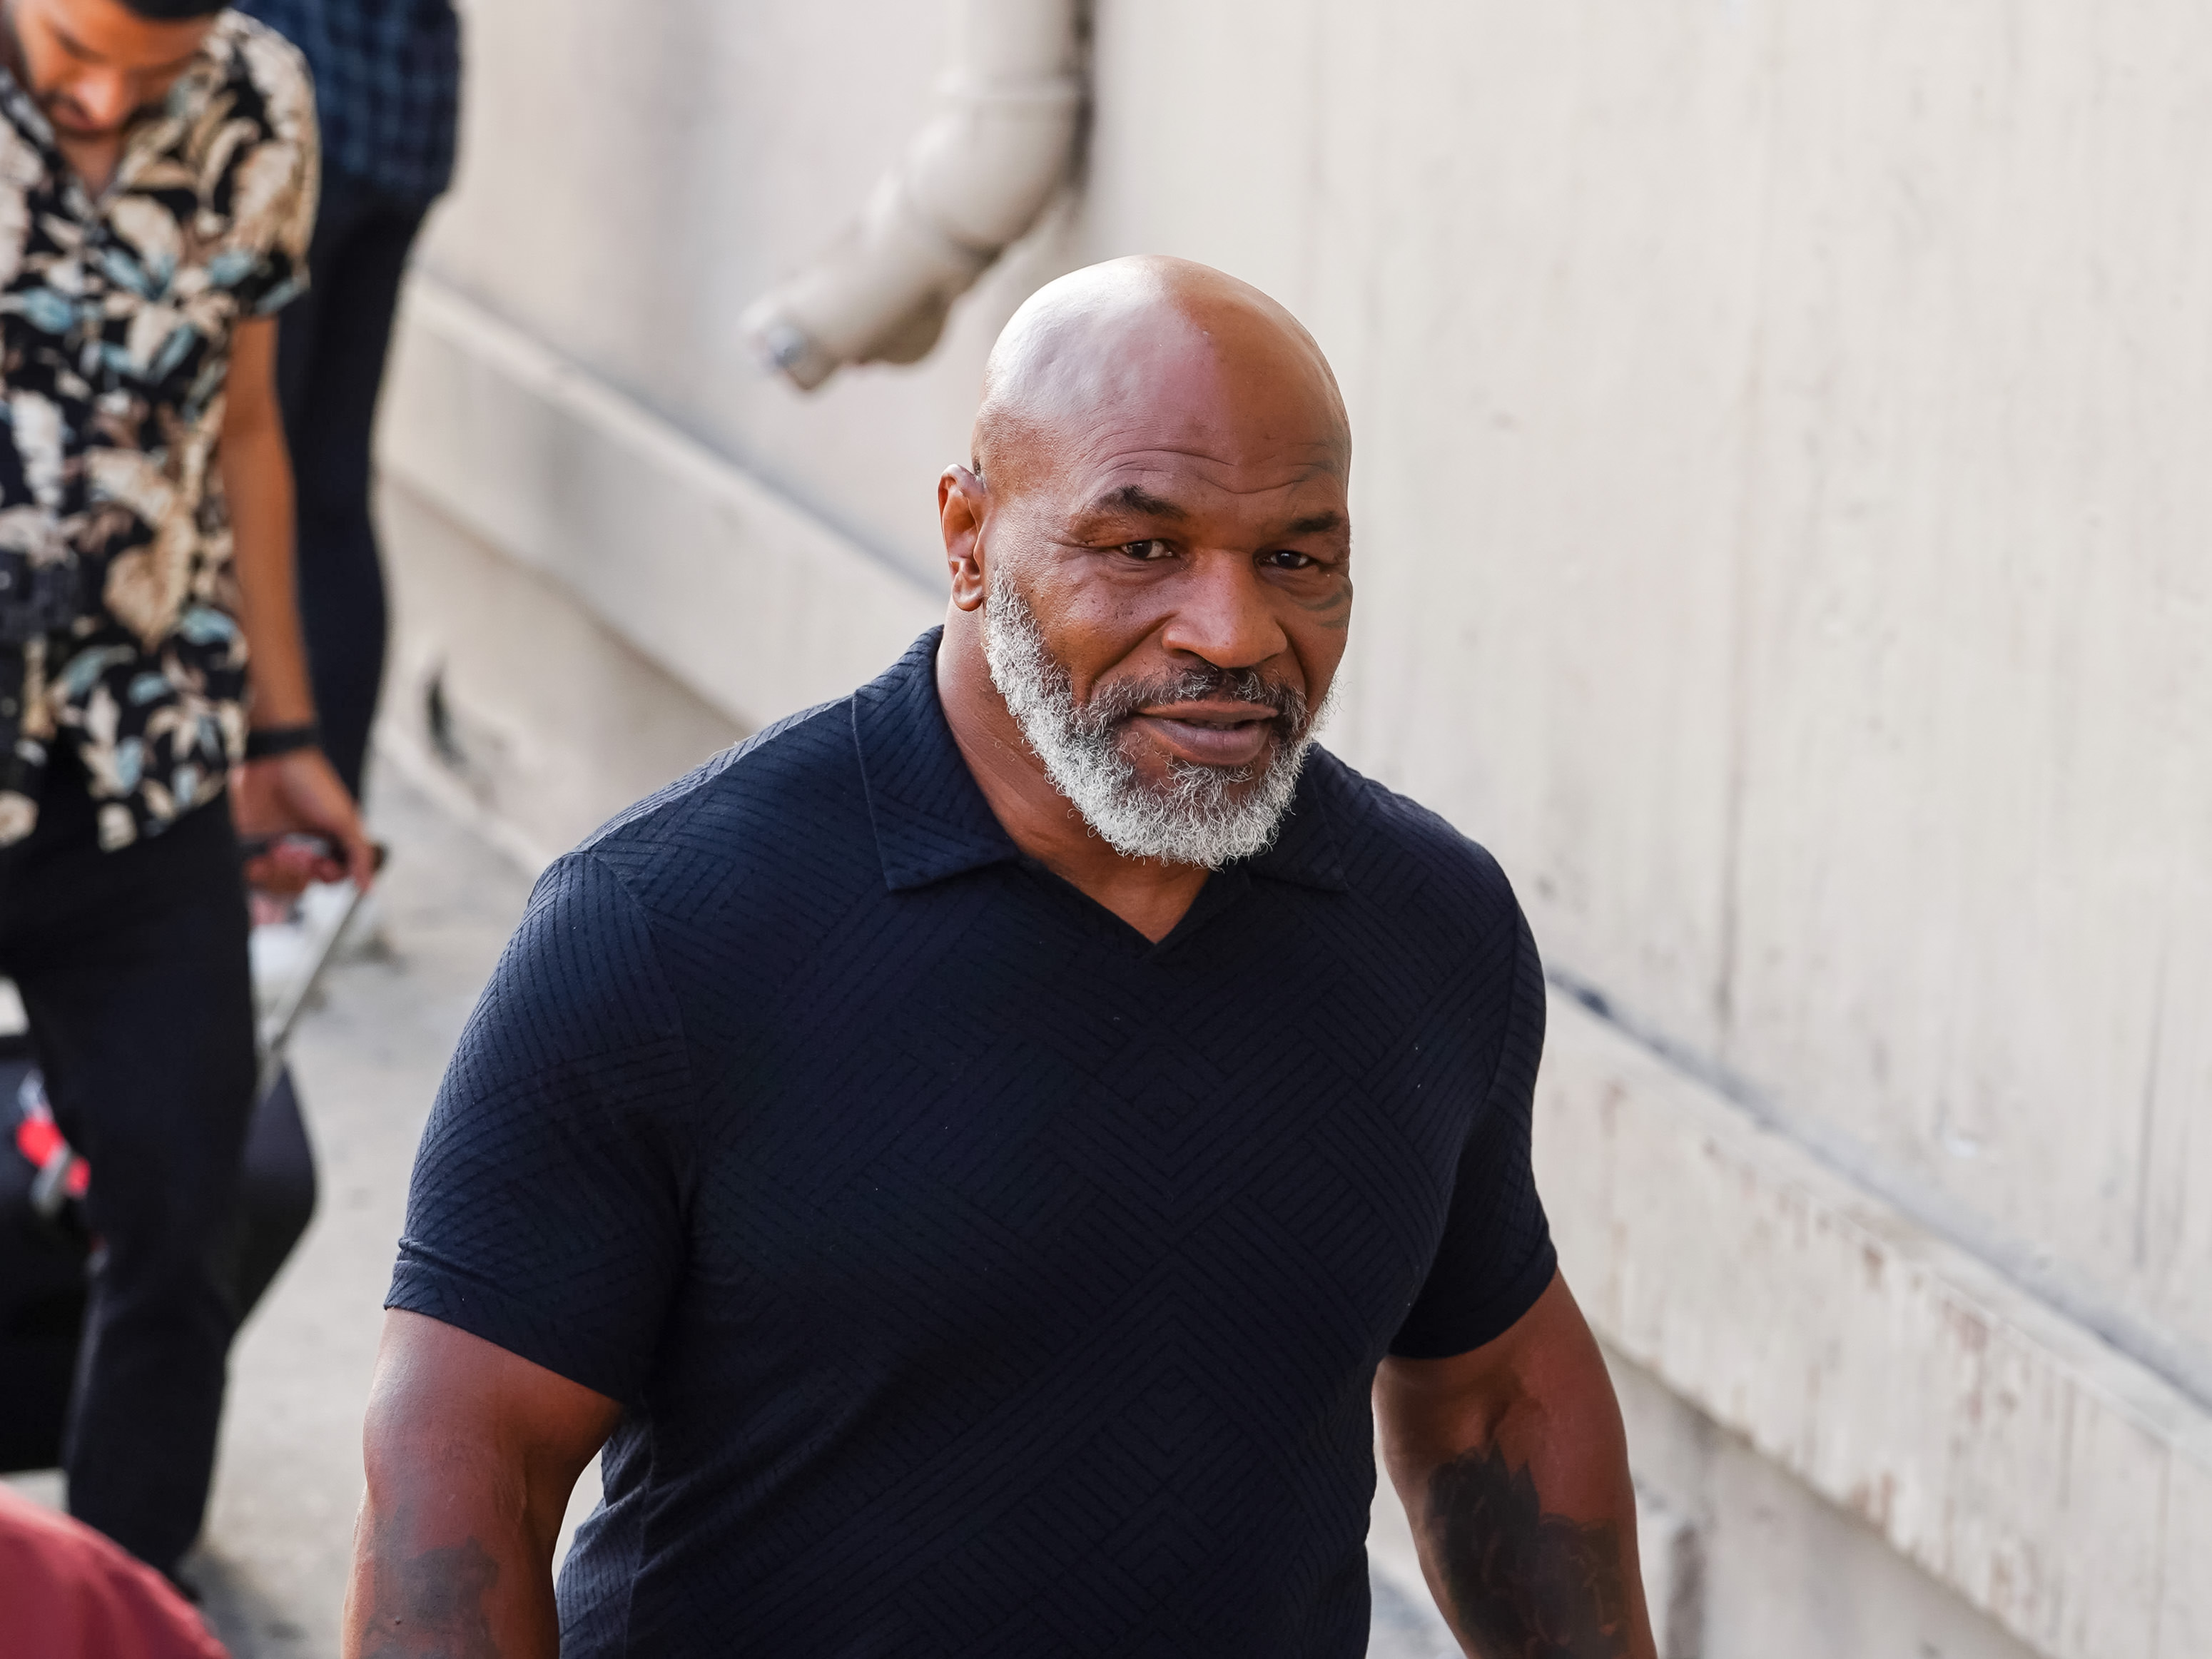 Mike Tyson is seen arriving at "Jimmy Kimmel Live."